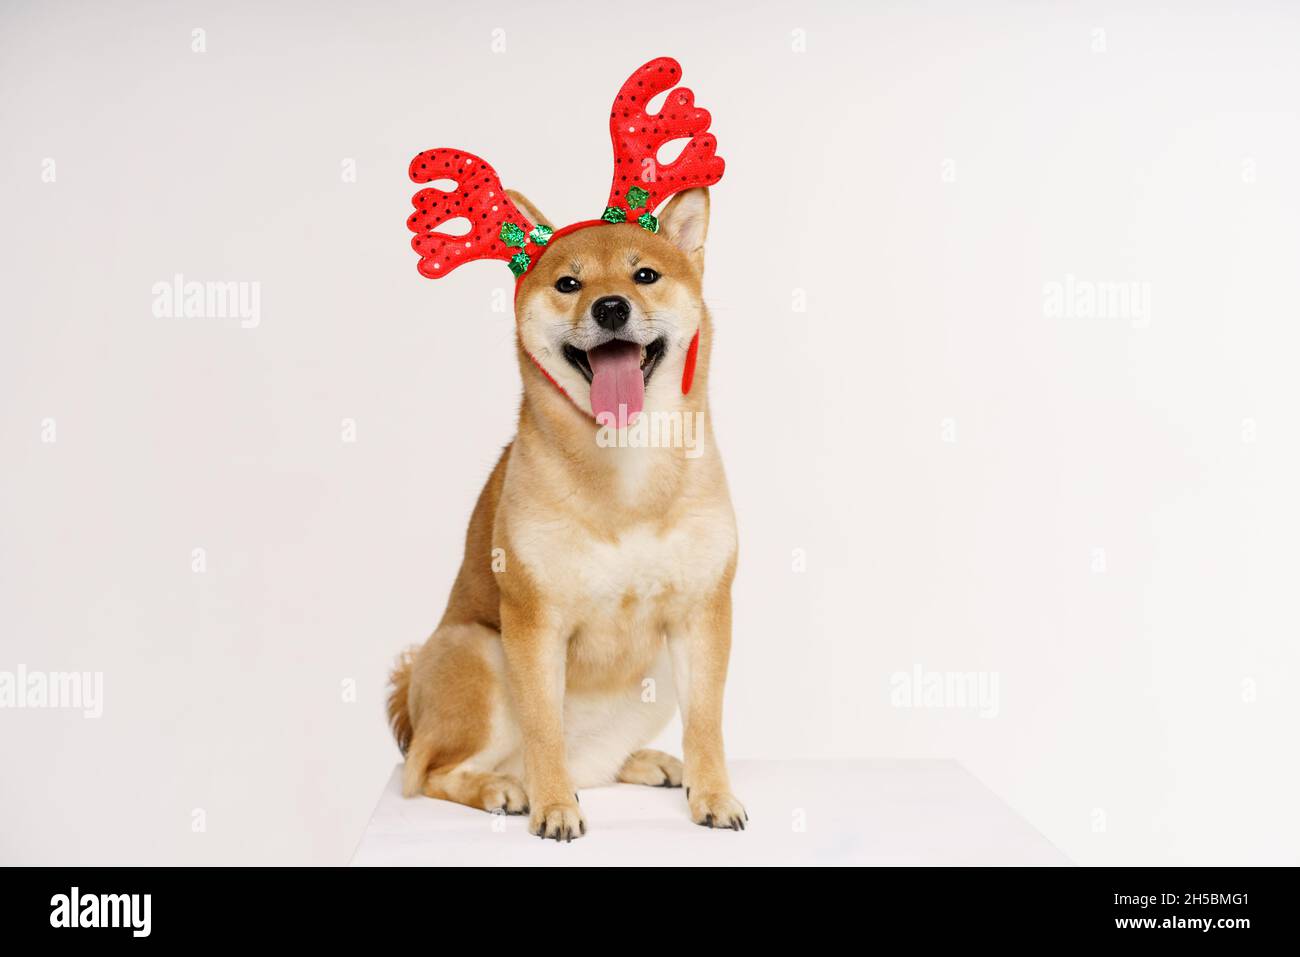 Cute funny dog in red deer antlers posing in studio on light background. Concept for christmas and new year holidays and discounts. High quality photo Stock Photo